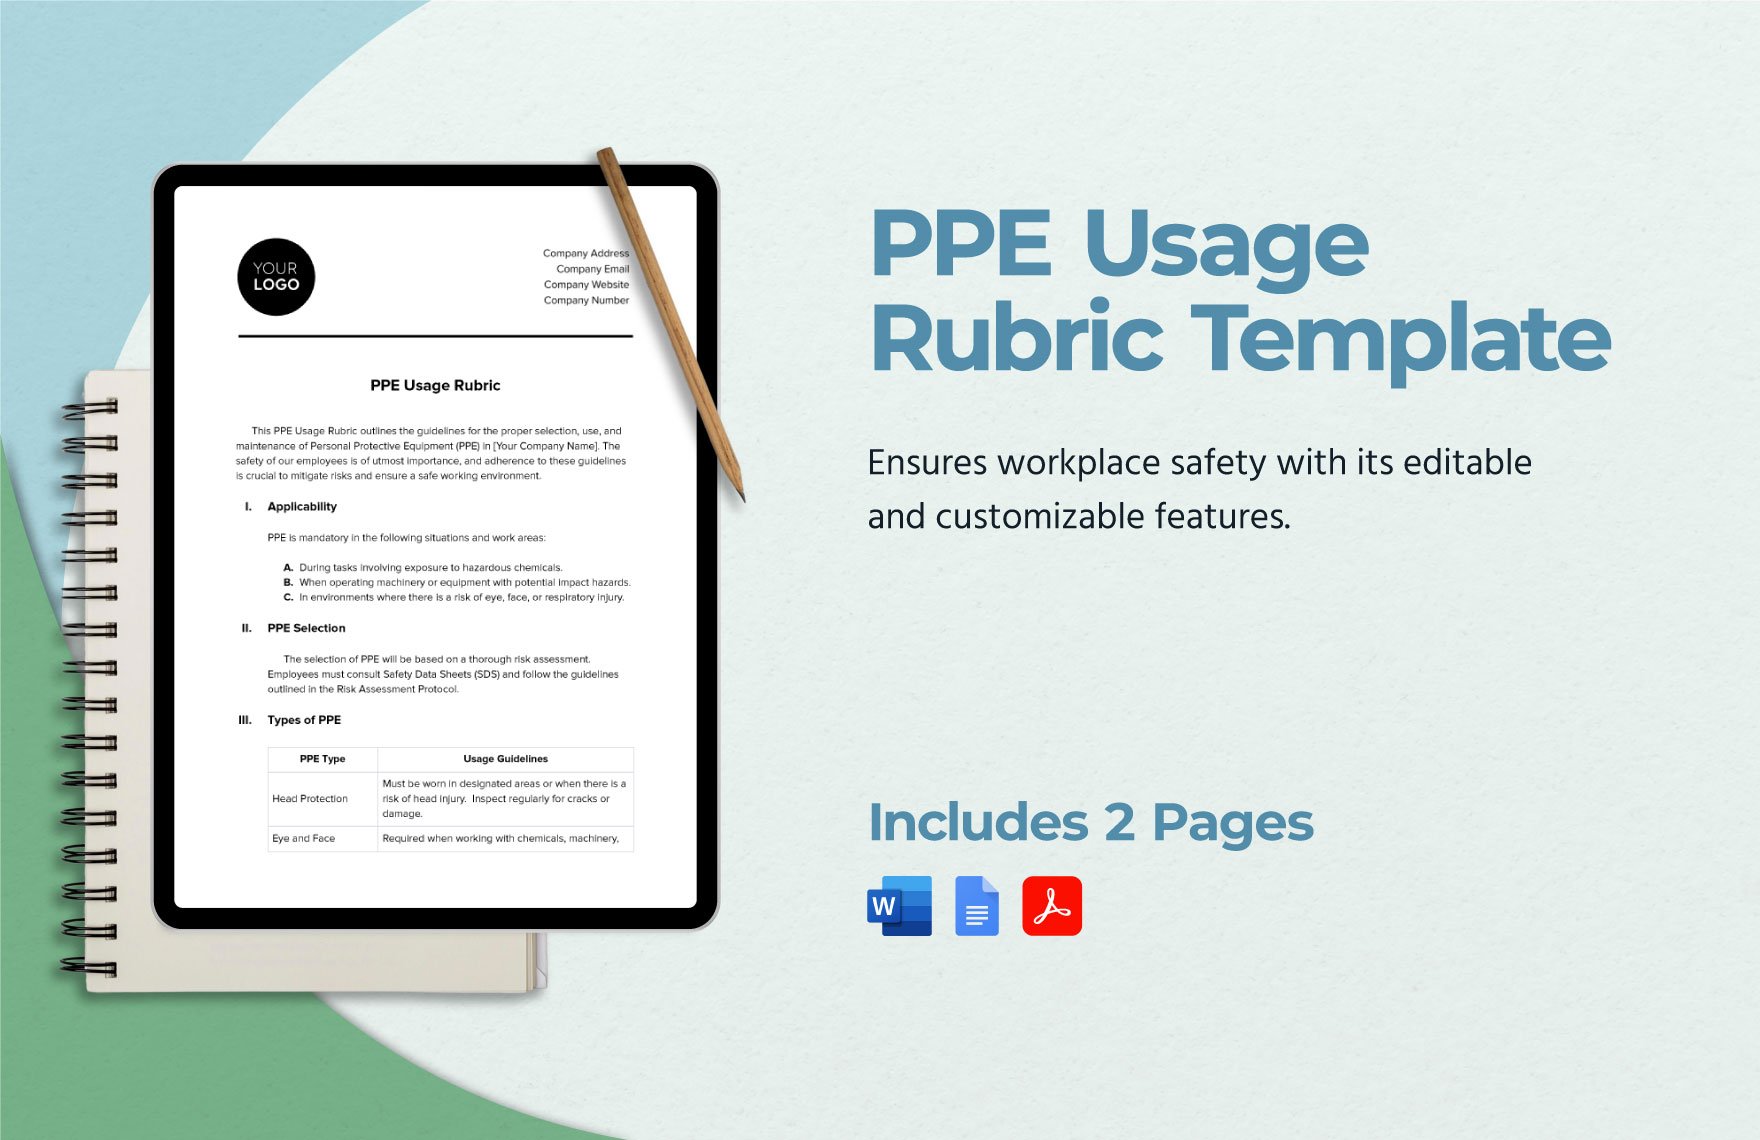 PPE Usage Rubric Template